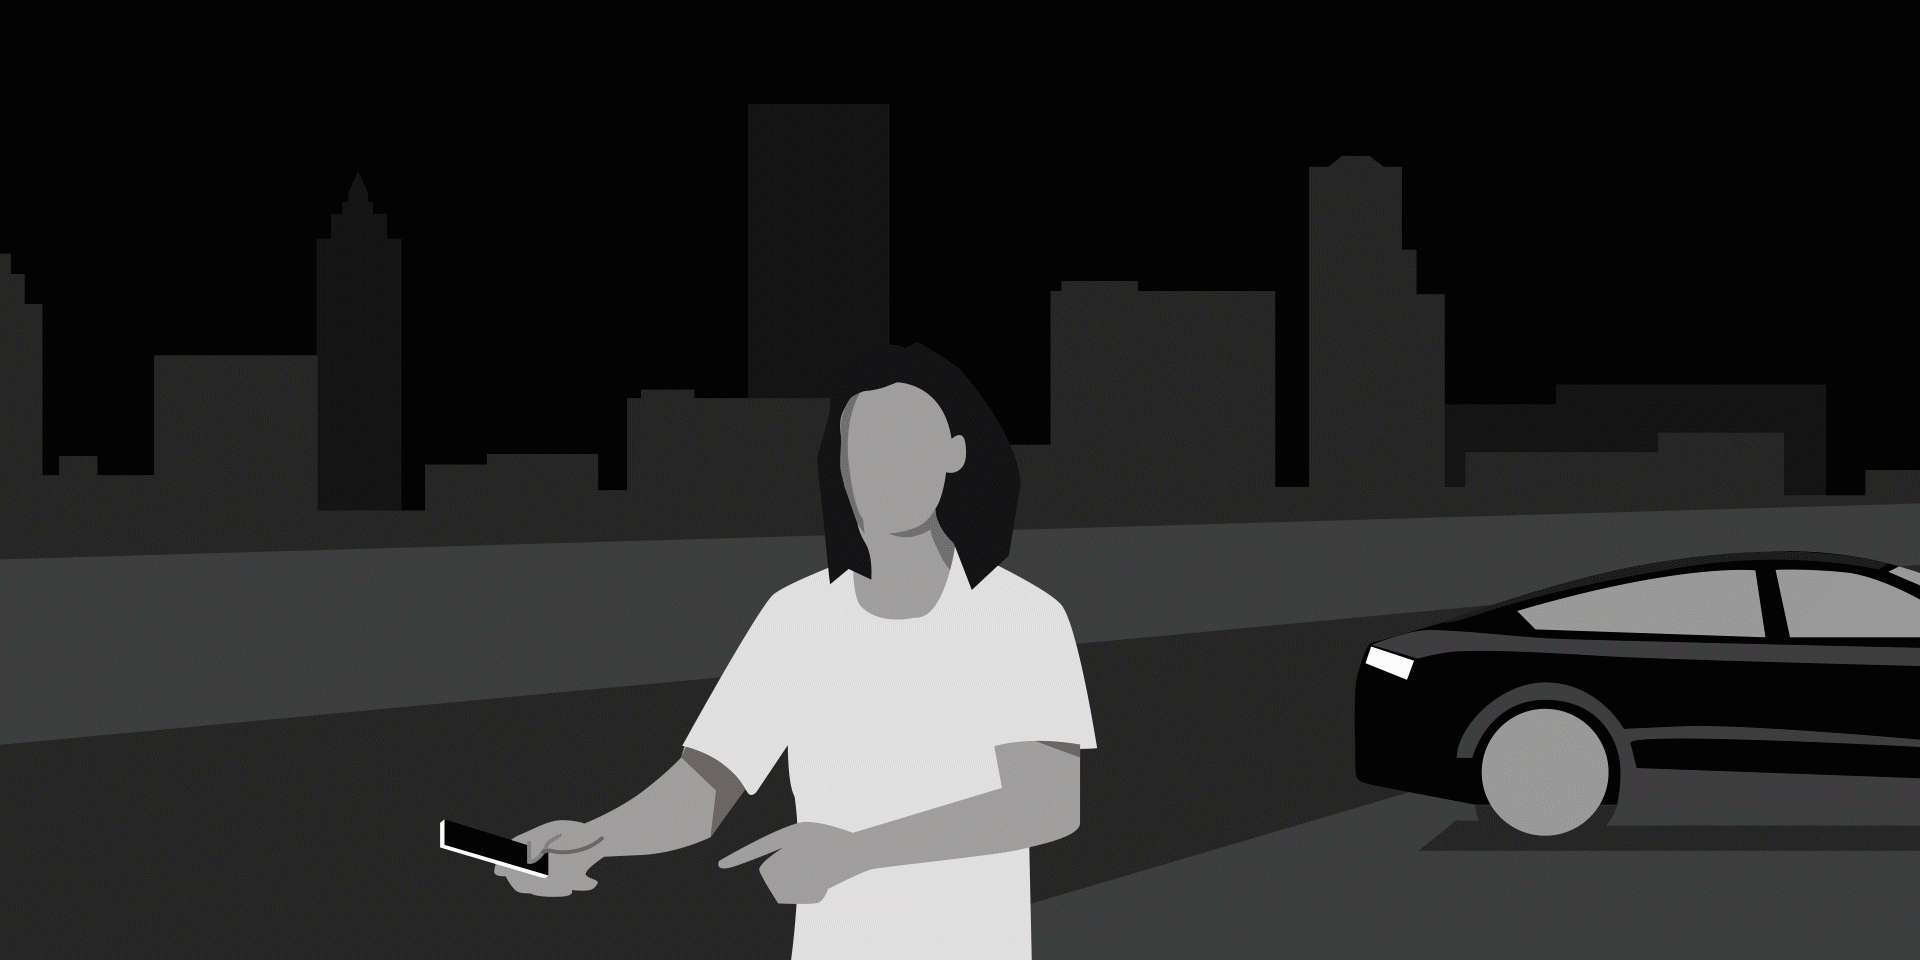 This illustration shows a person with a smartphone and a vehicle in the background. Symbols in the foreground indicate that the person is connected to the vehicle via their phone and can operate it by using various functions.